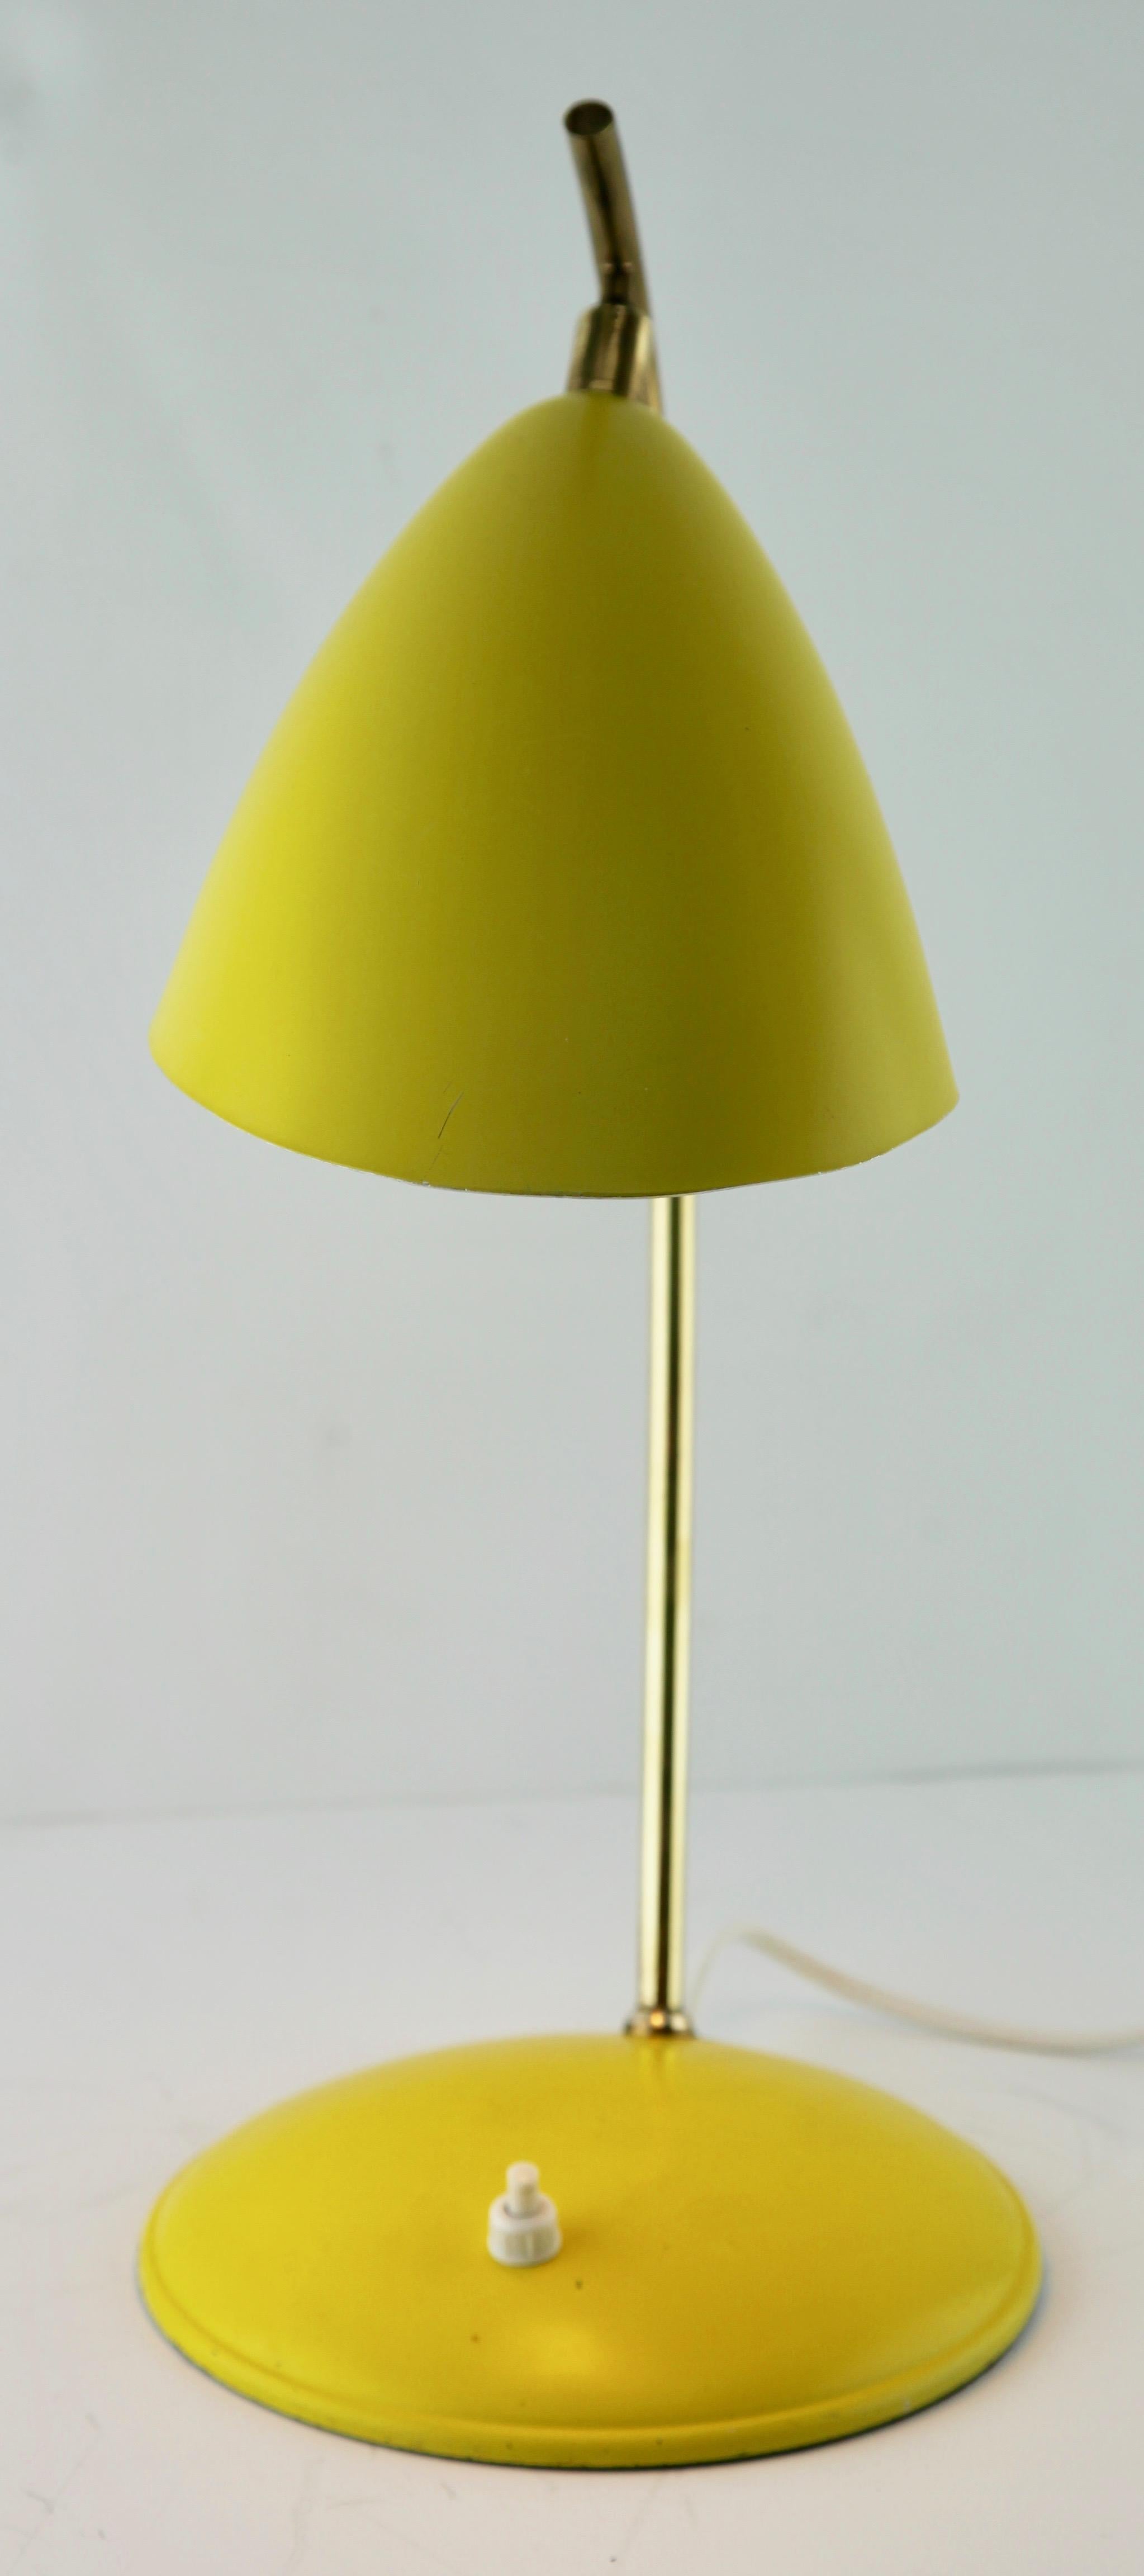 1970s table lamp in the Stilnovo style with brass fittings on a metal base. The lamp has a shade made of metal giving it a matte, white surface inside,
Ideal for a side table. The finishing touch for that retro look!

No problem, the lamp works